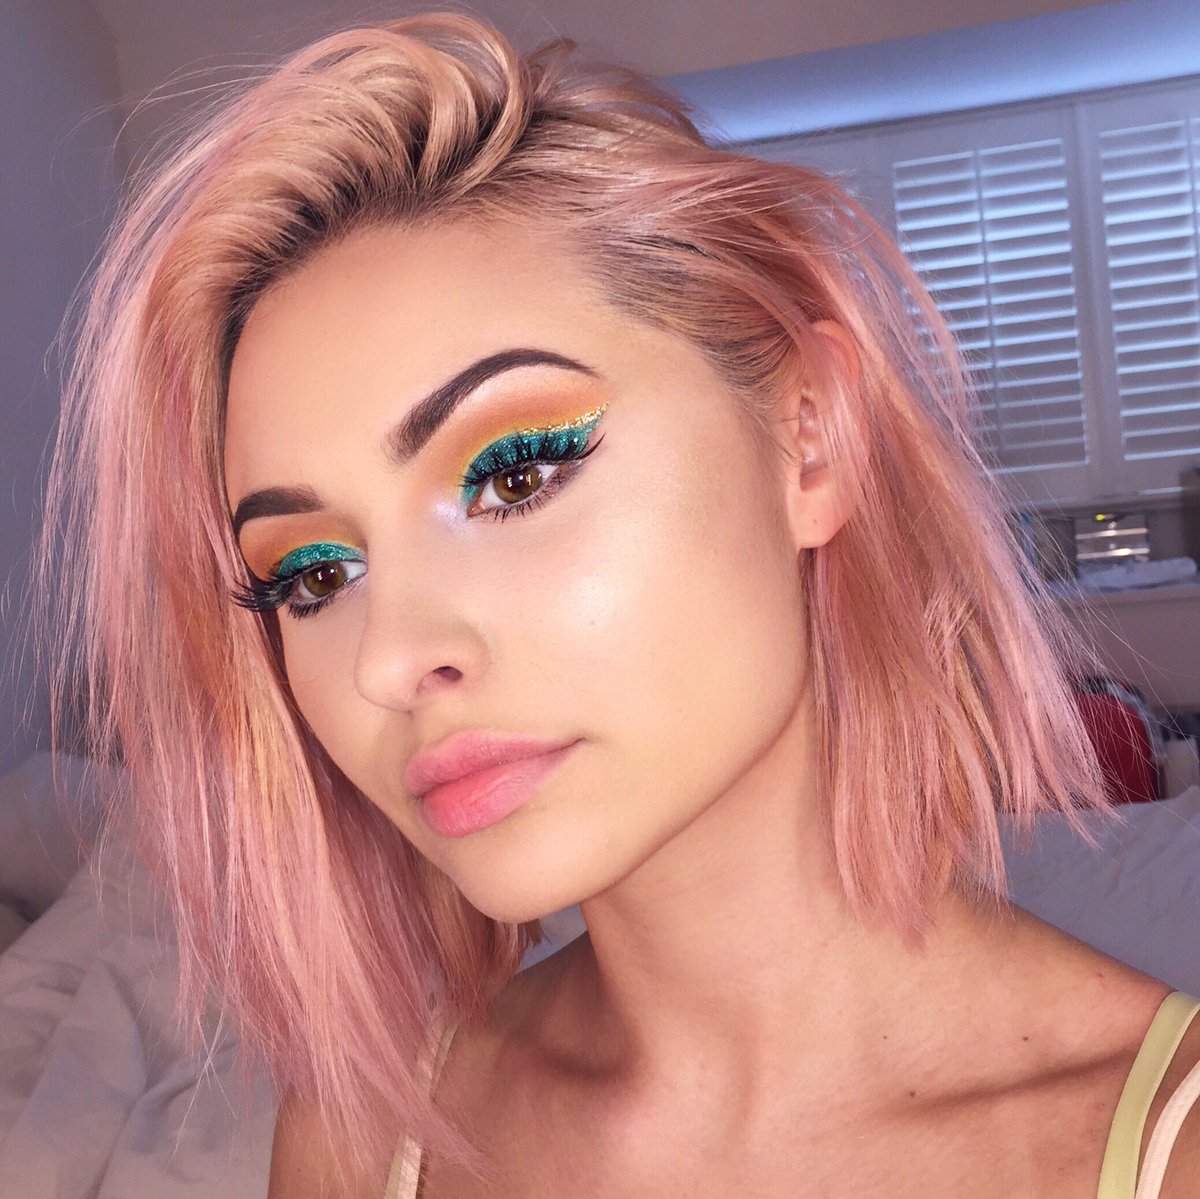 Talia Mar på Twitter: "@Halleatonix candy floss by colour, neon pink by adore and awkward peach by LDN together with conditioner for a pastel X" / Twitter